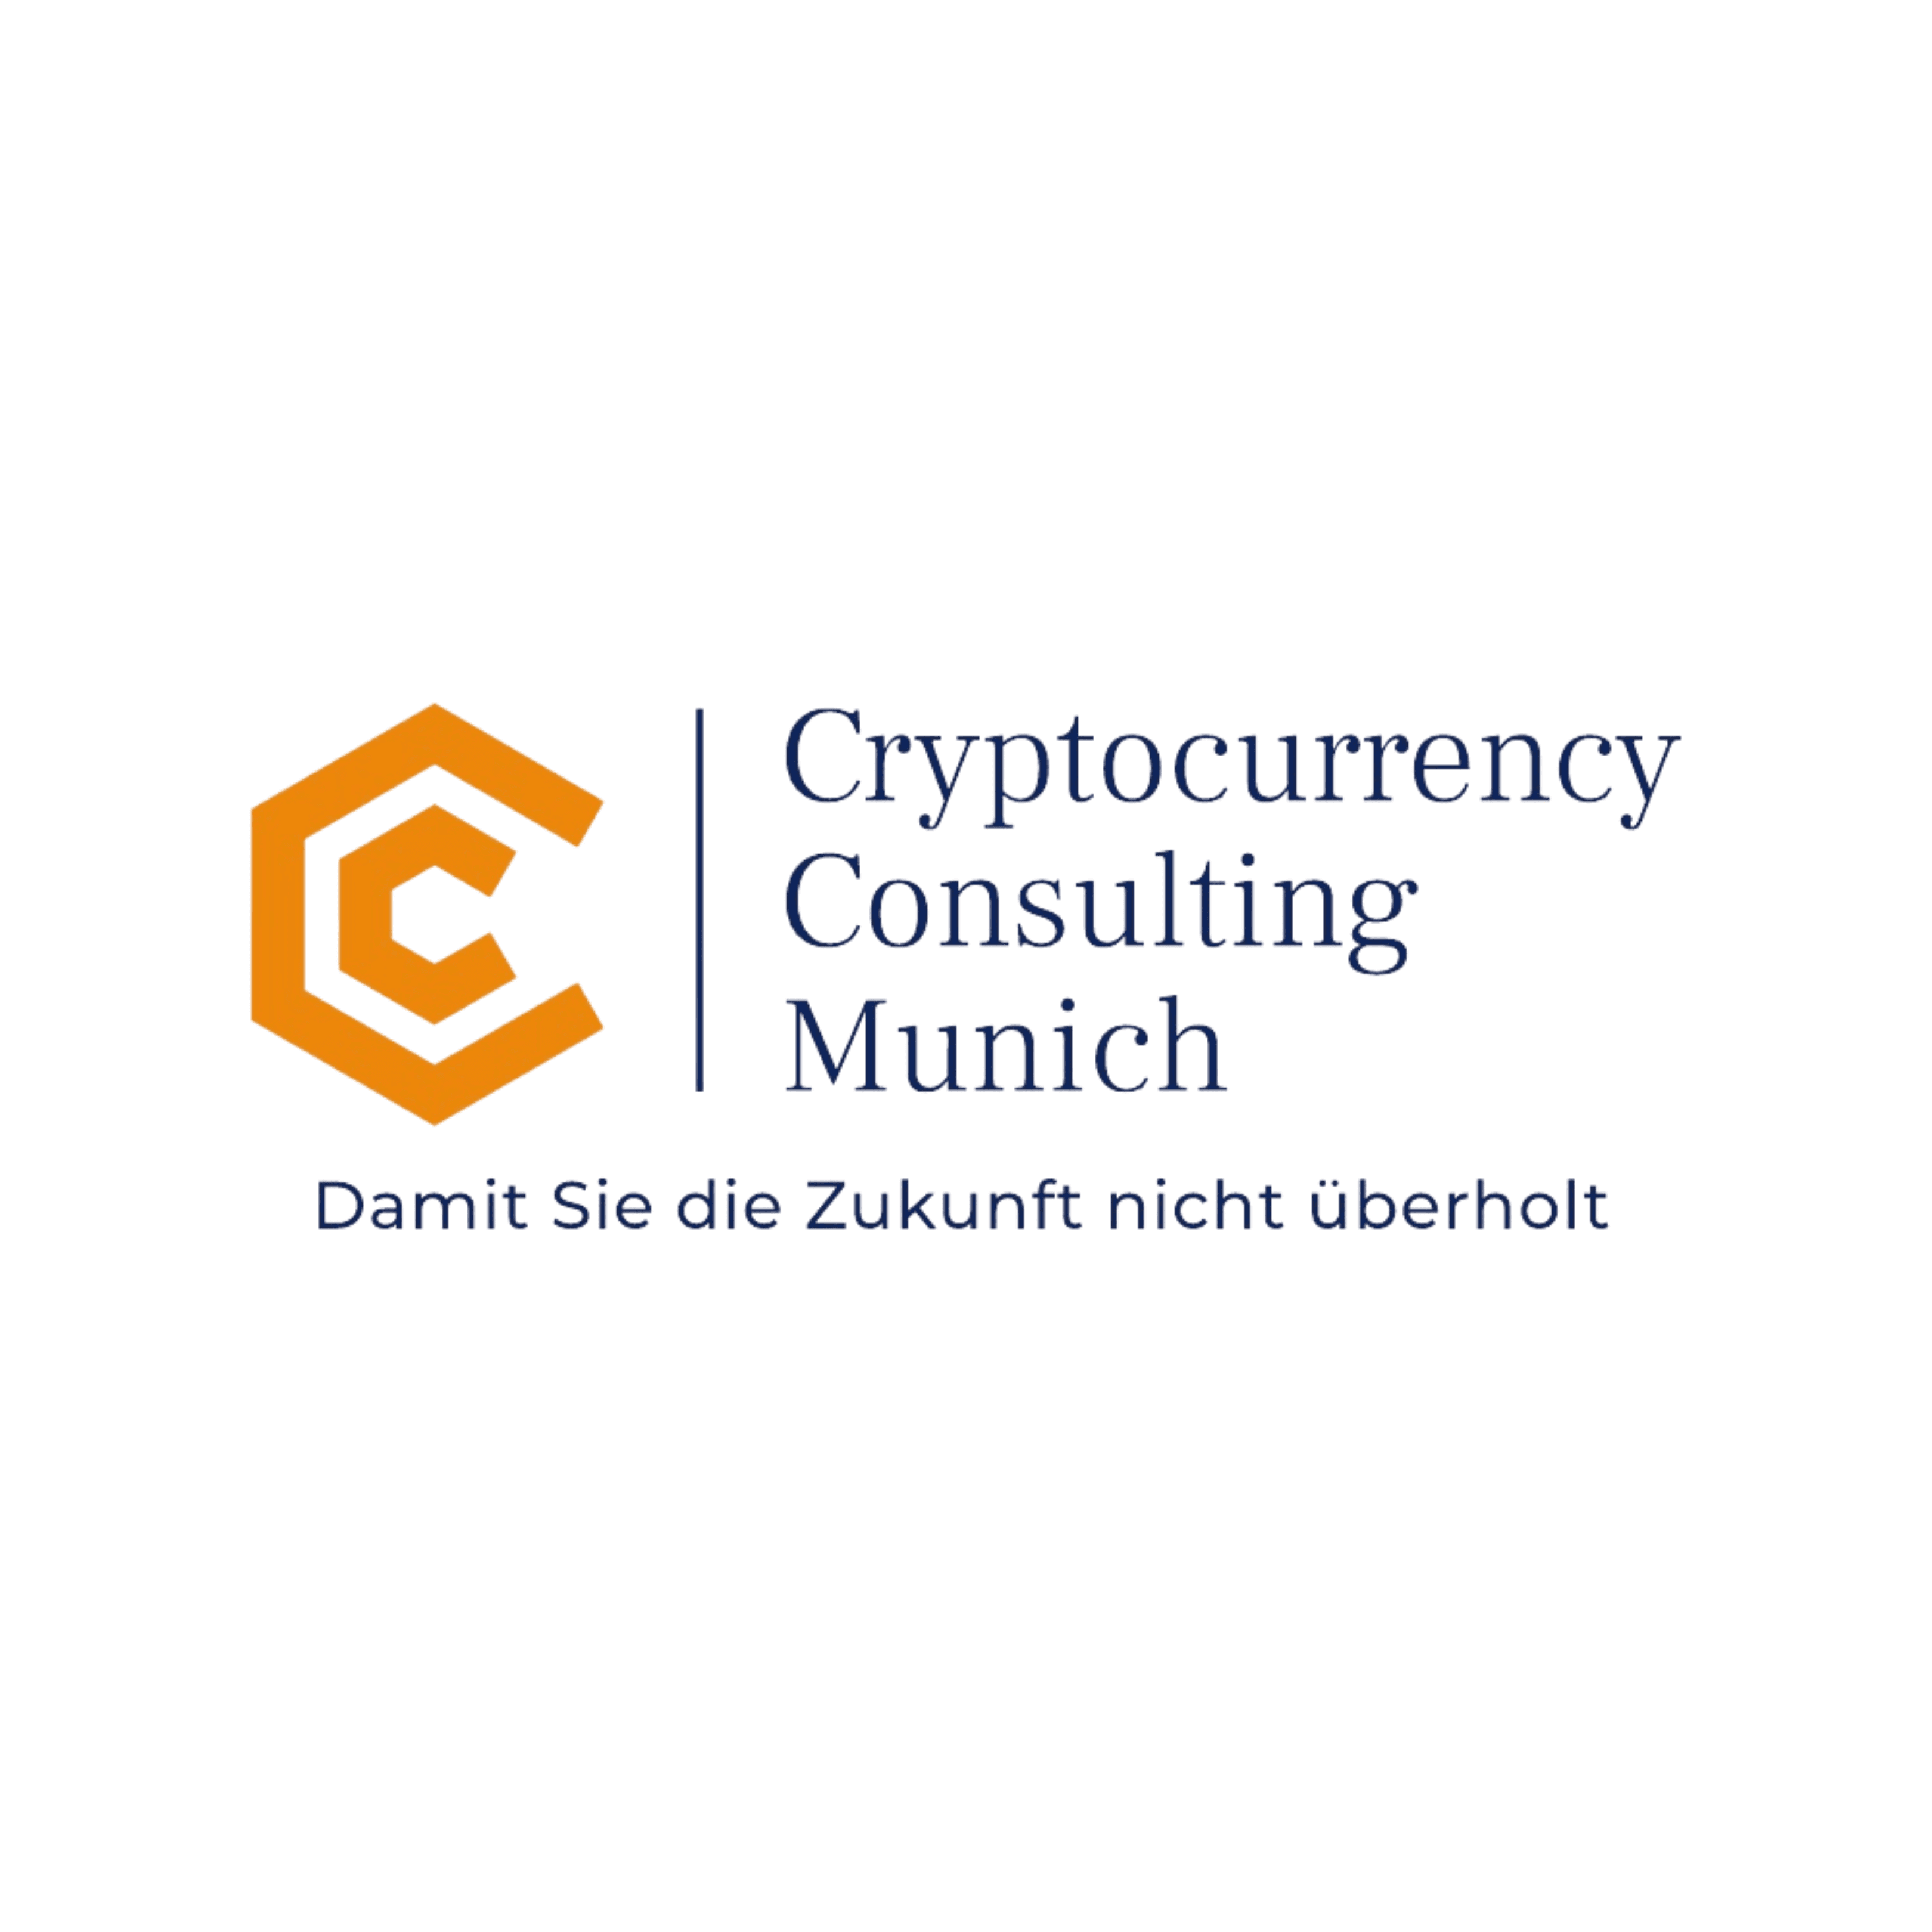 Cryptocurrencyconsulting